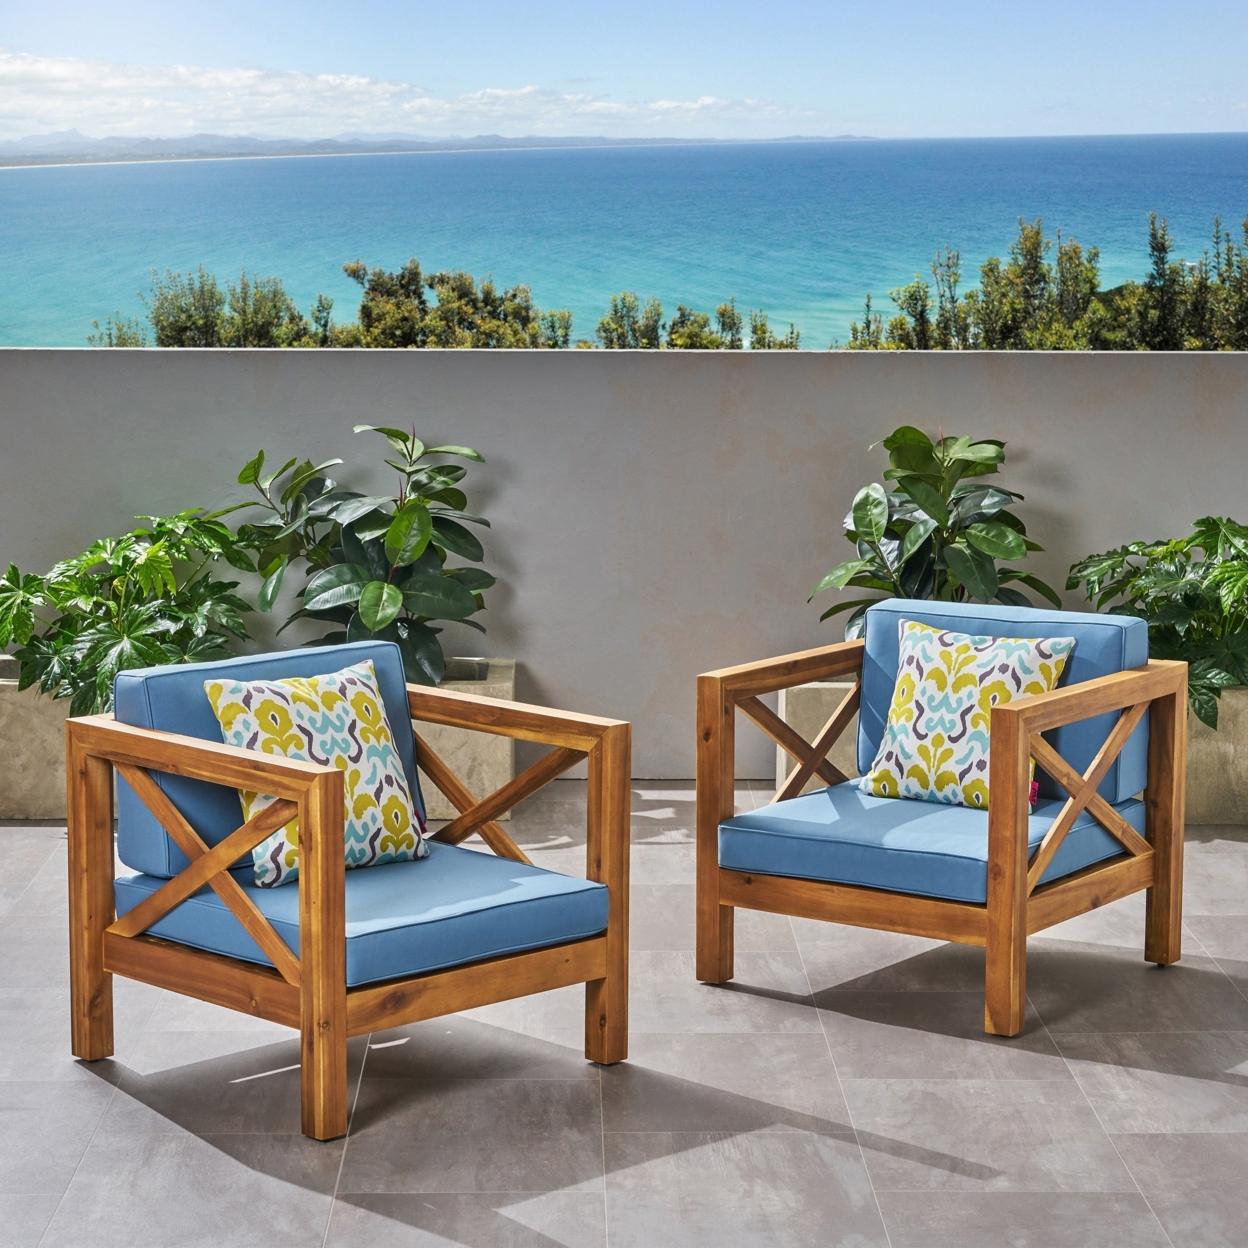 Indira Outdoor Acacia Wood Club Chairs With Cushions (Set Of 2) - Teak + Blue